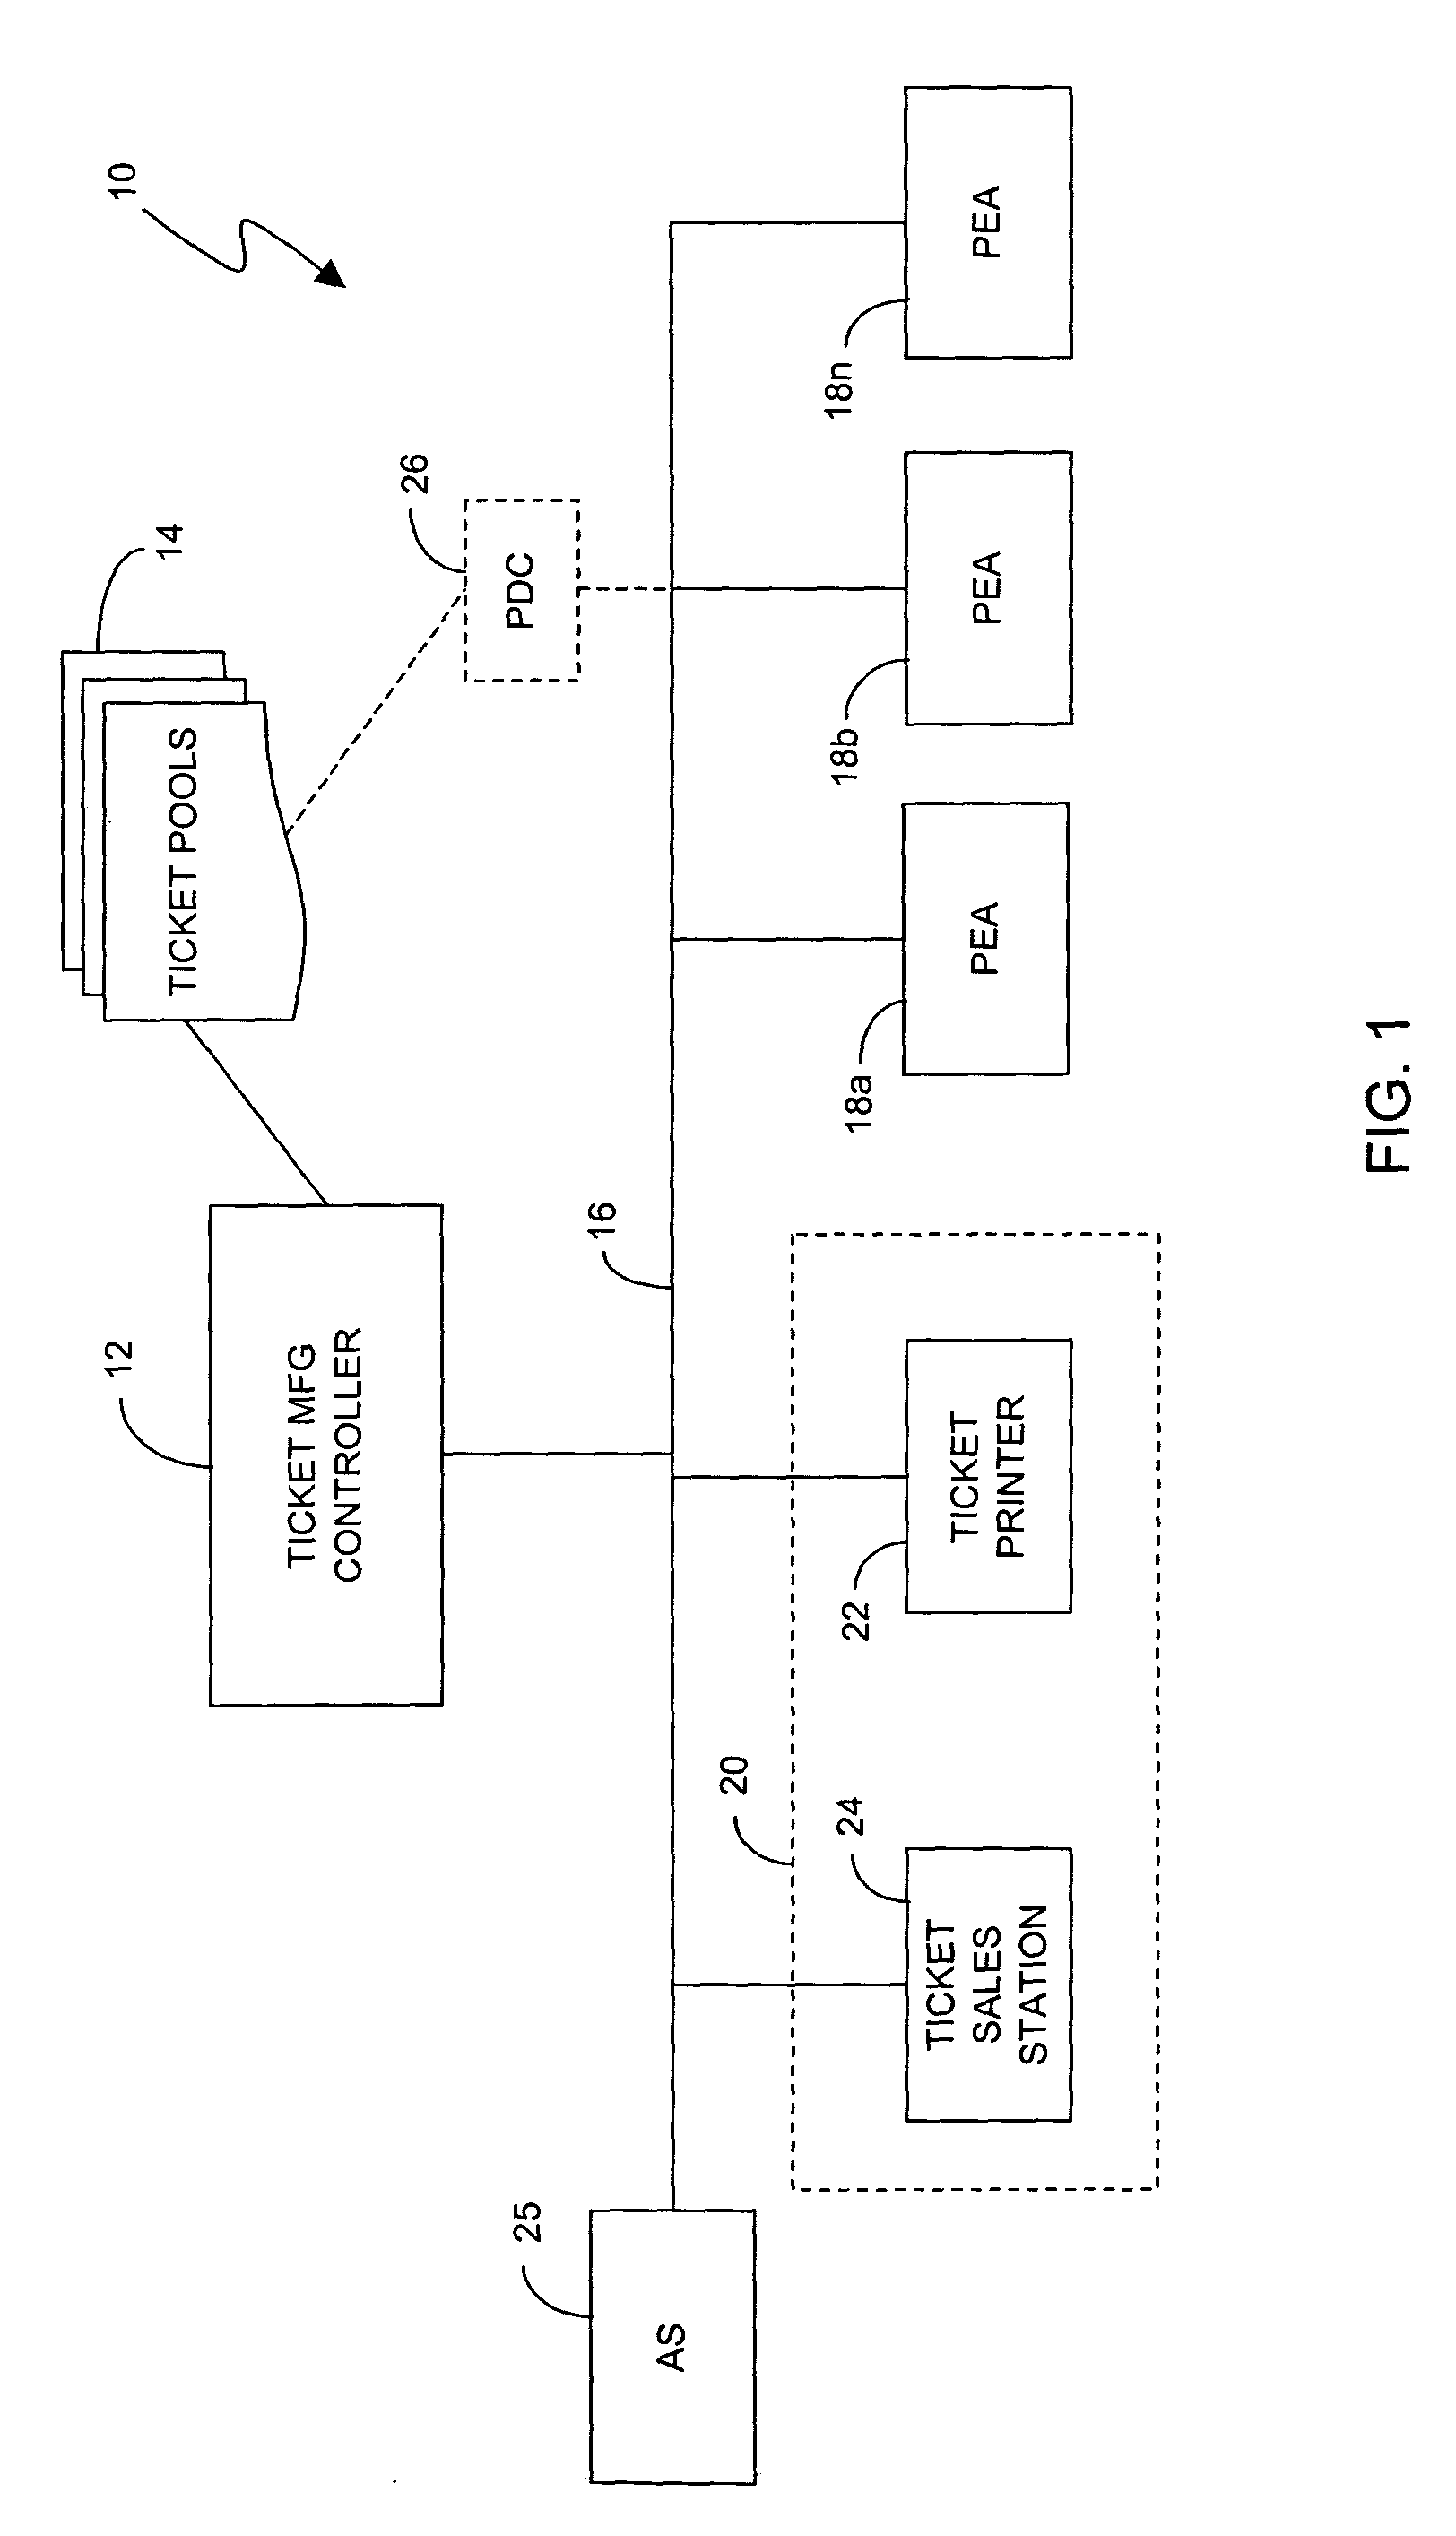 Lottery-style on-demand ticket system and method